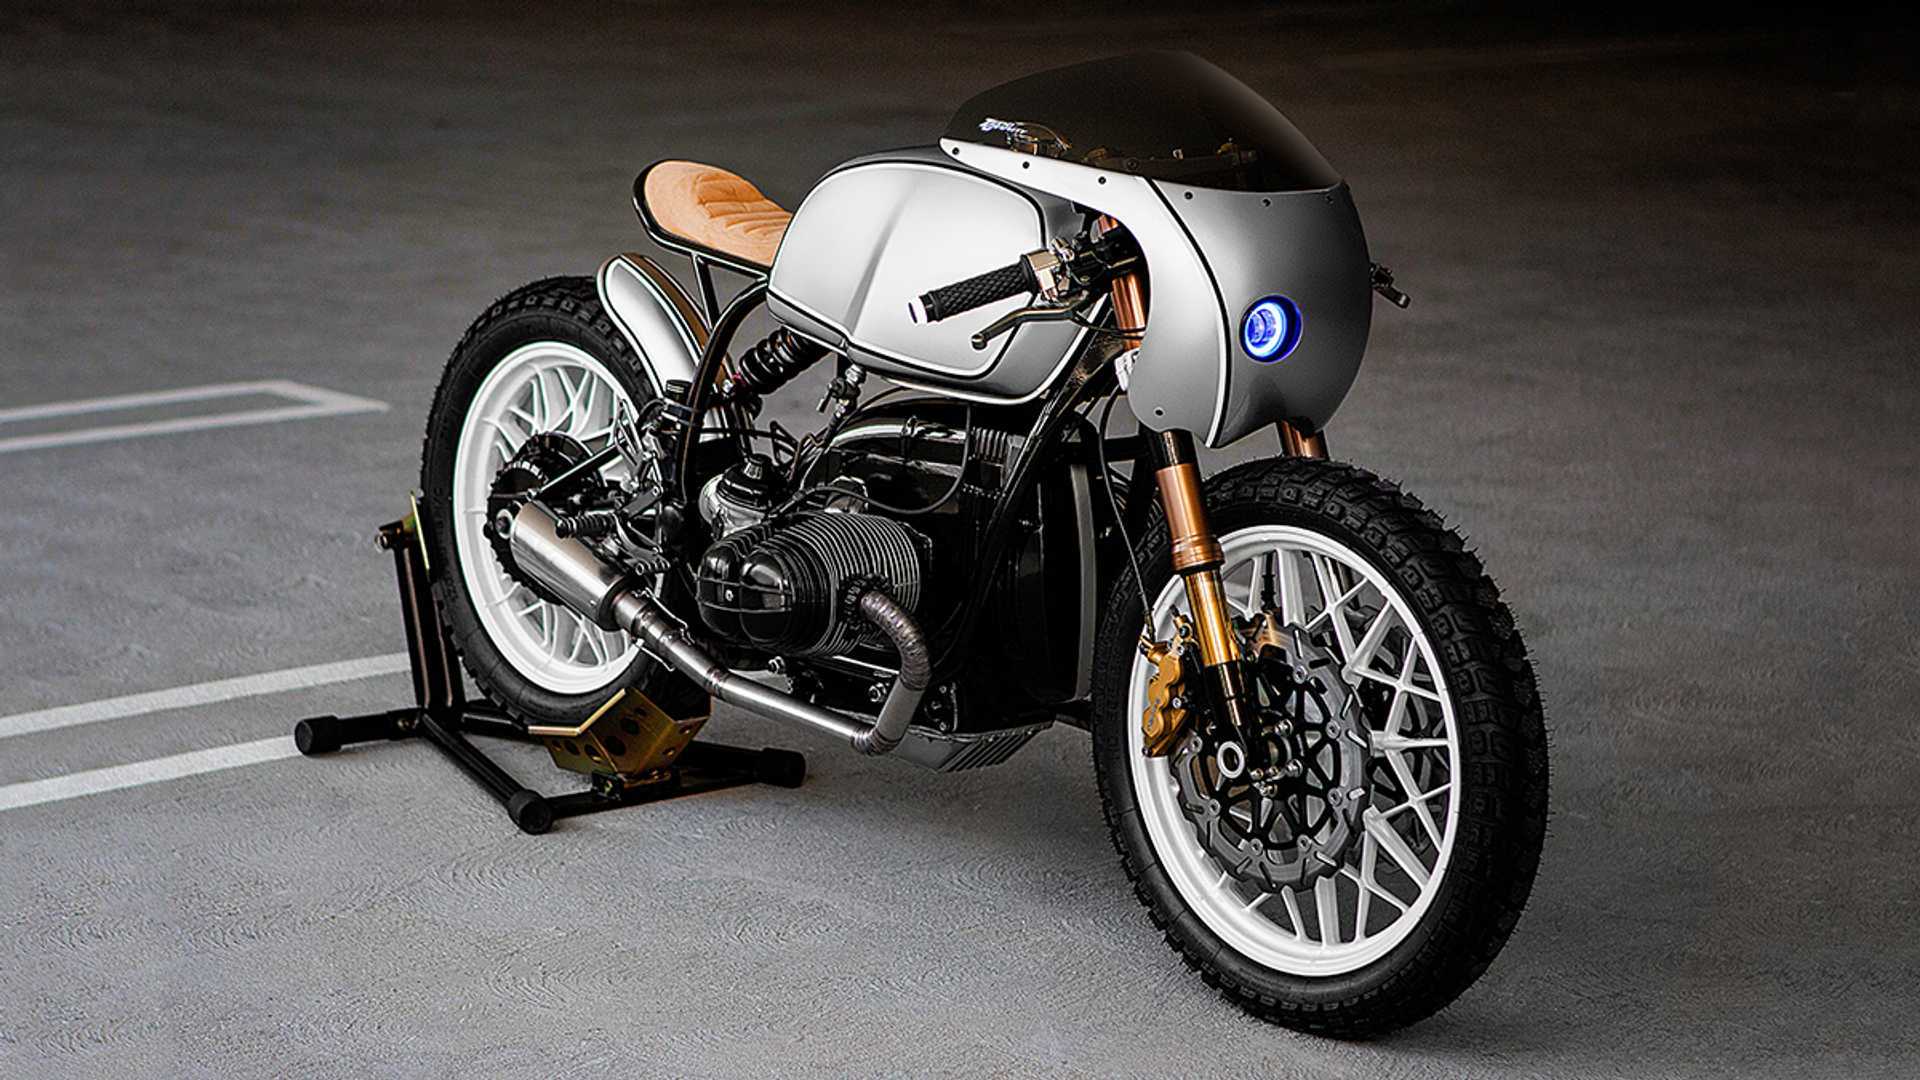 Motorcycle Monday: Enter To Win These BMW Café Racers